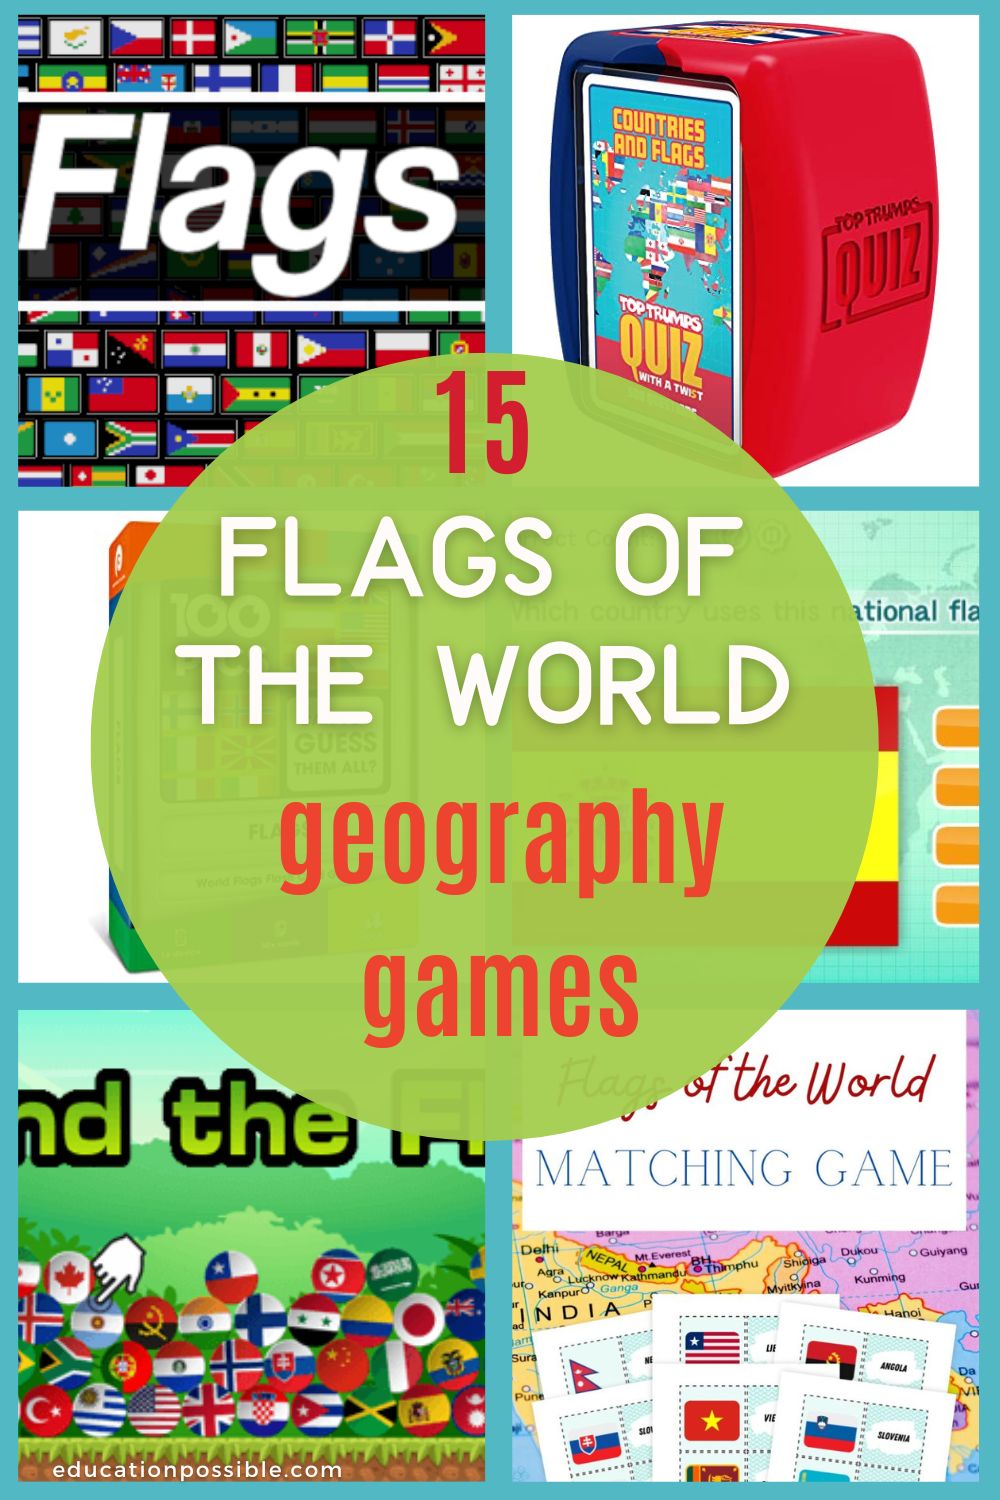 Flags of the World Geography Games